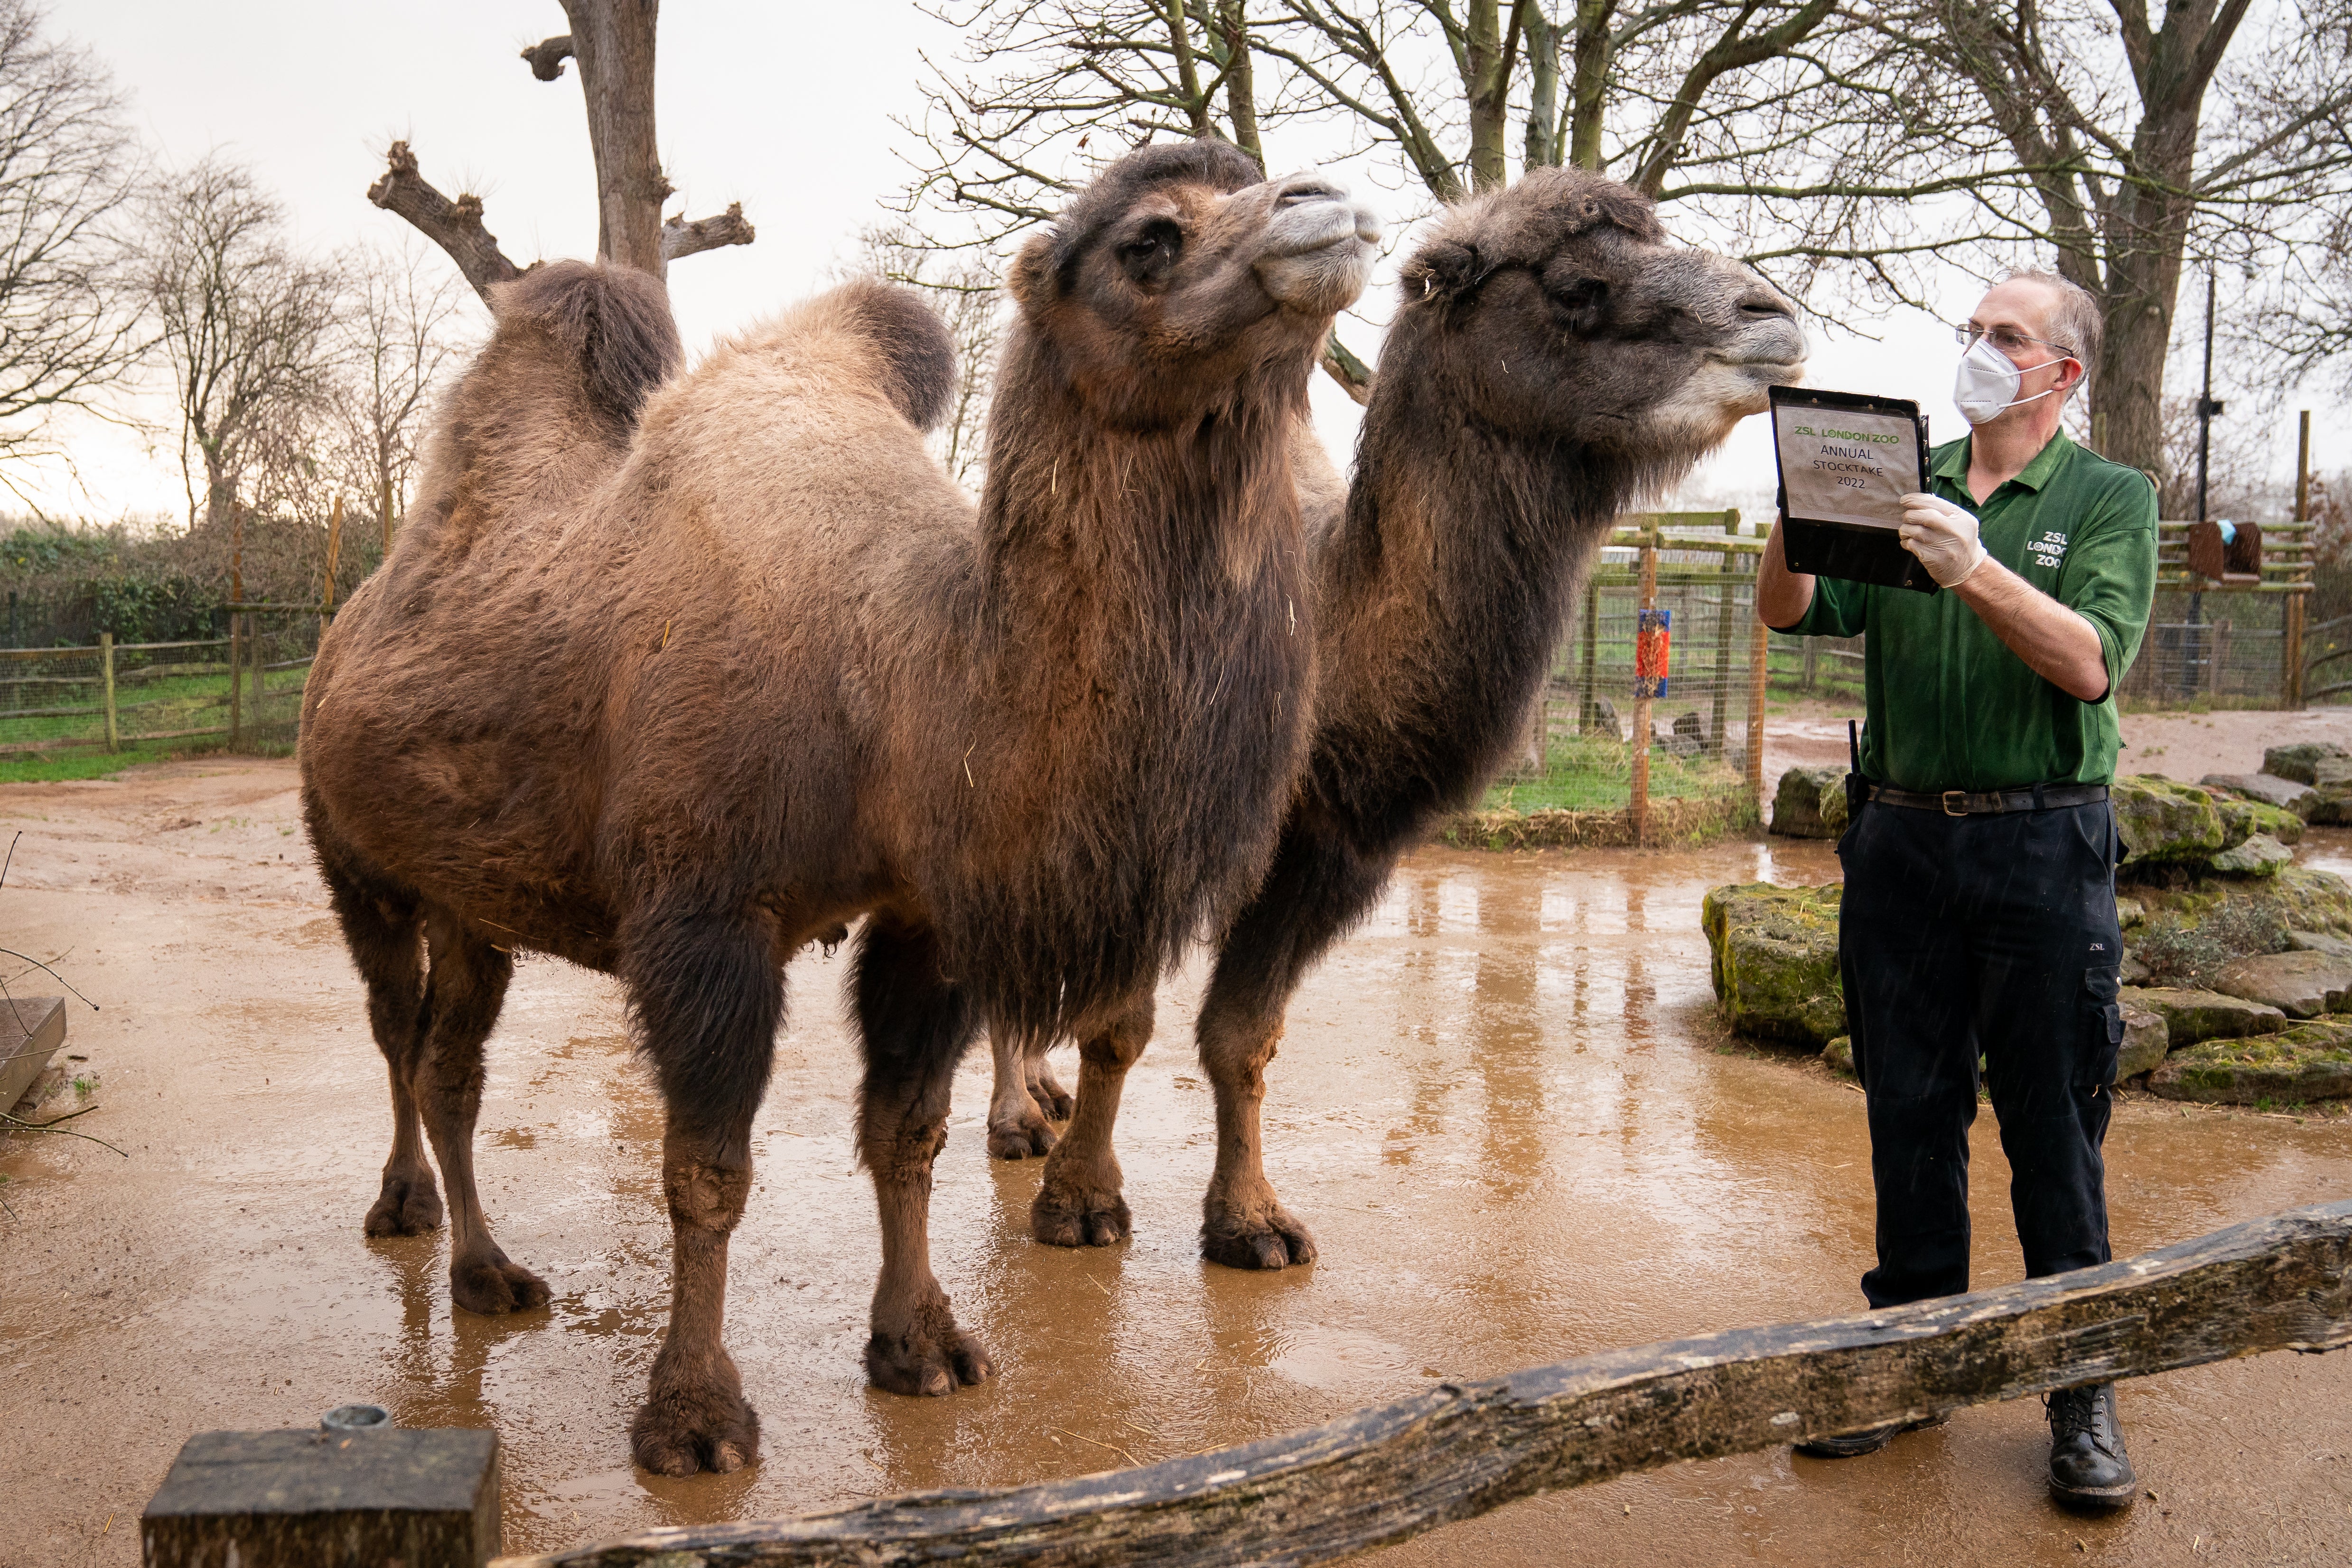 The annual stocktake is a condition of the zoo’s licence (Aaron Chown/PA)